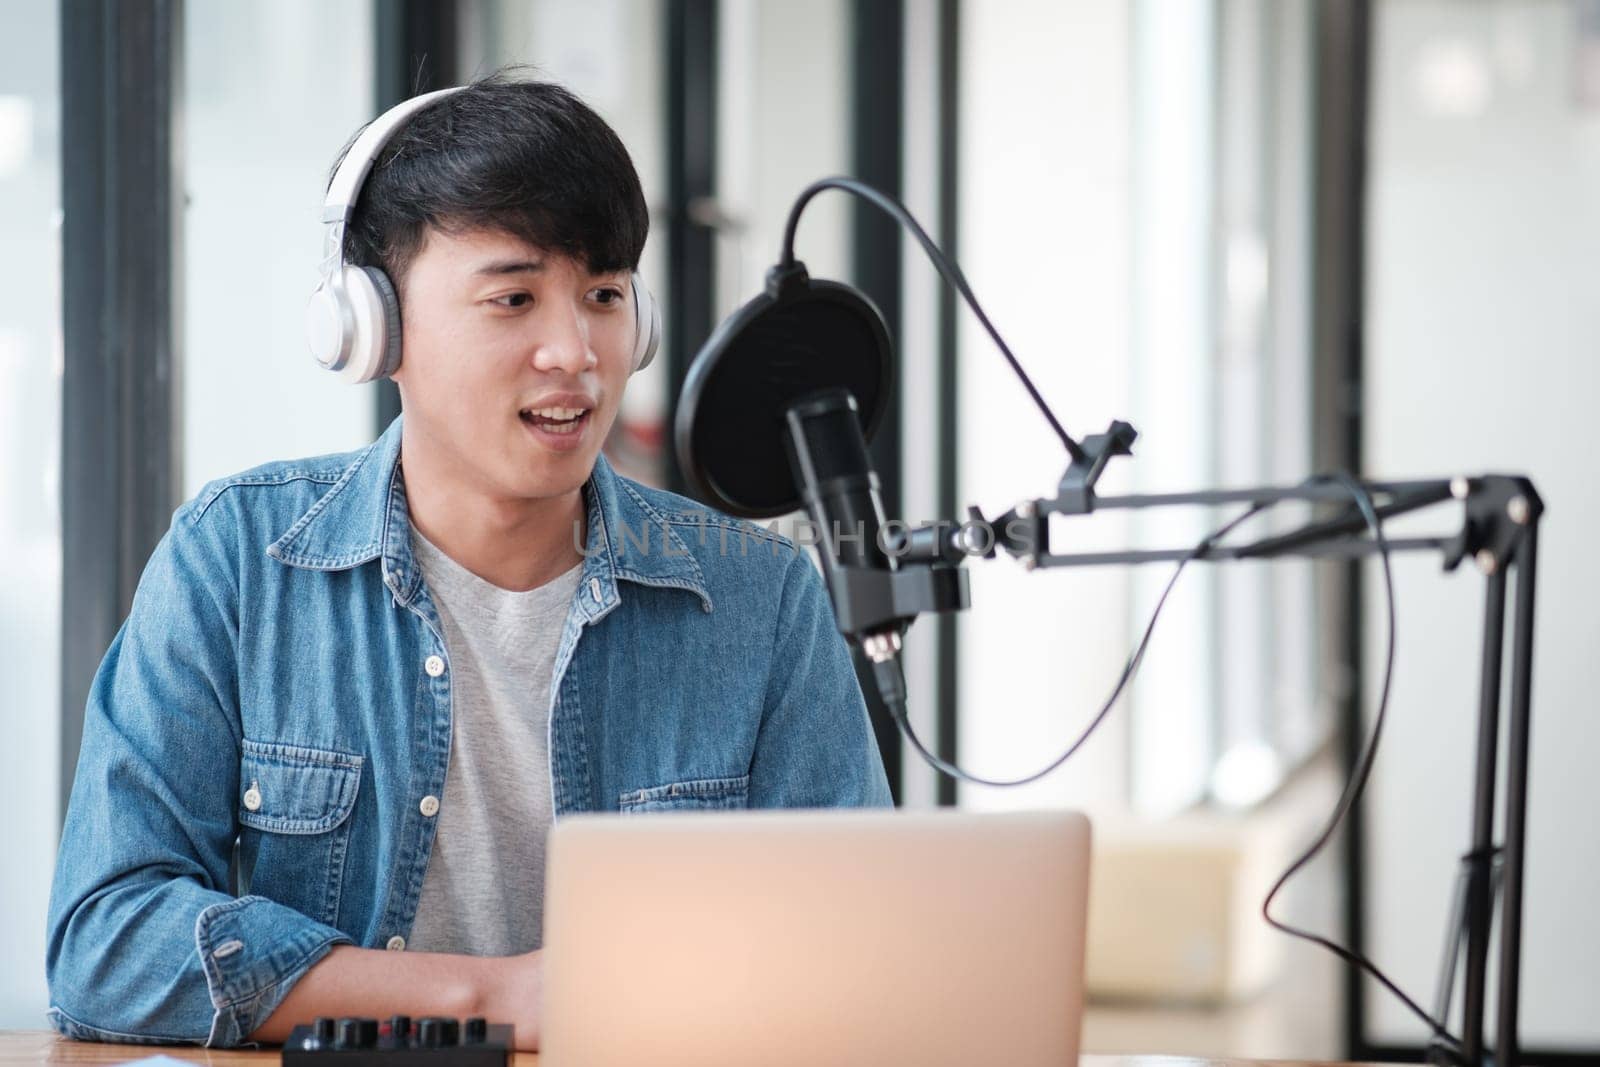 A man wearing headphones and a blue shirt is sitting in front of a laptop. He is wearing a microphone and he is recording something